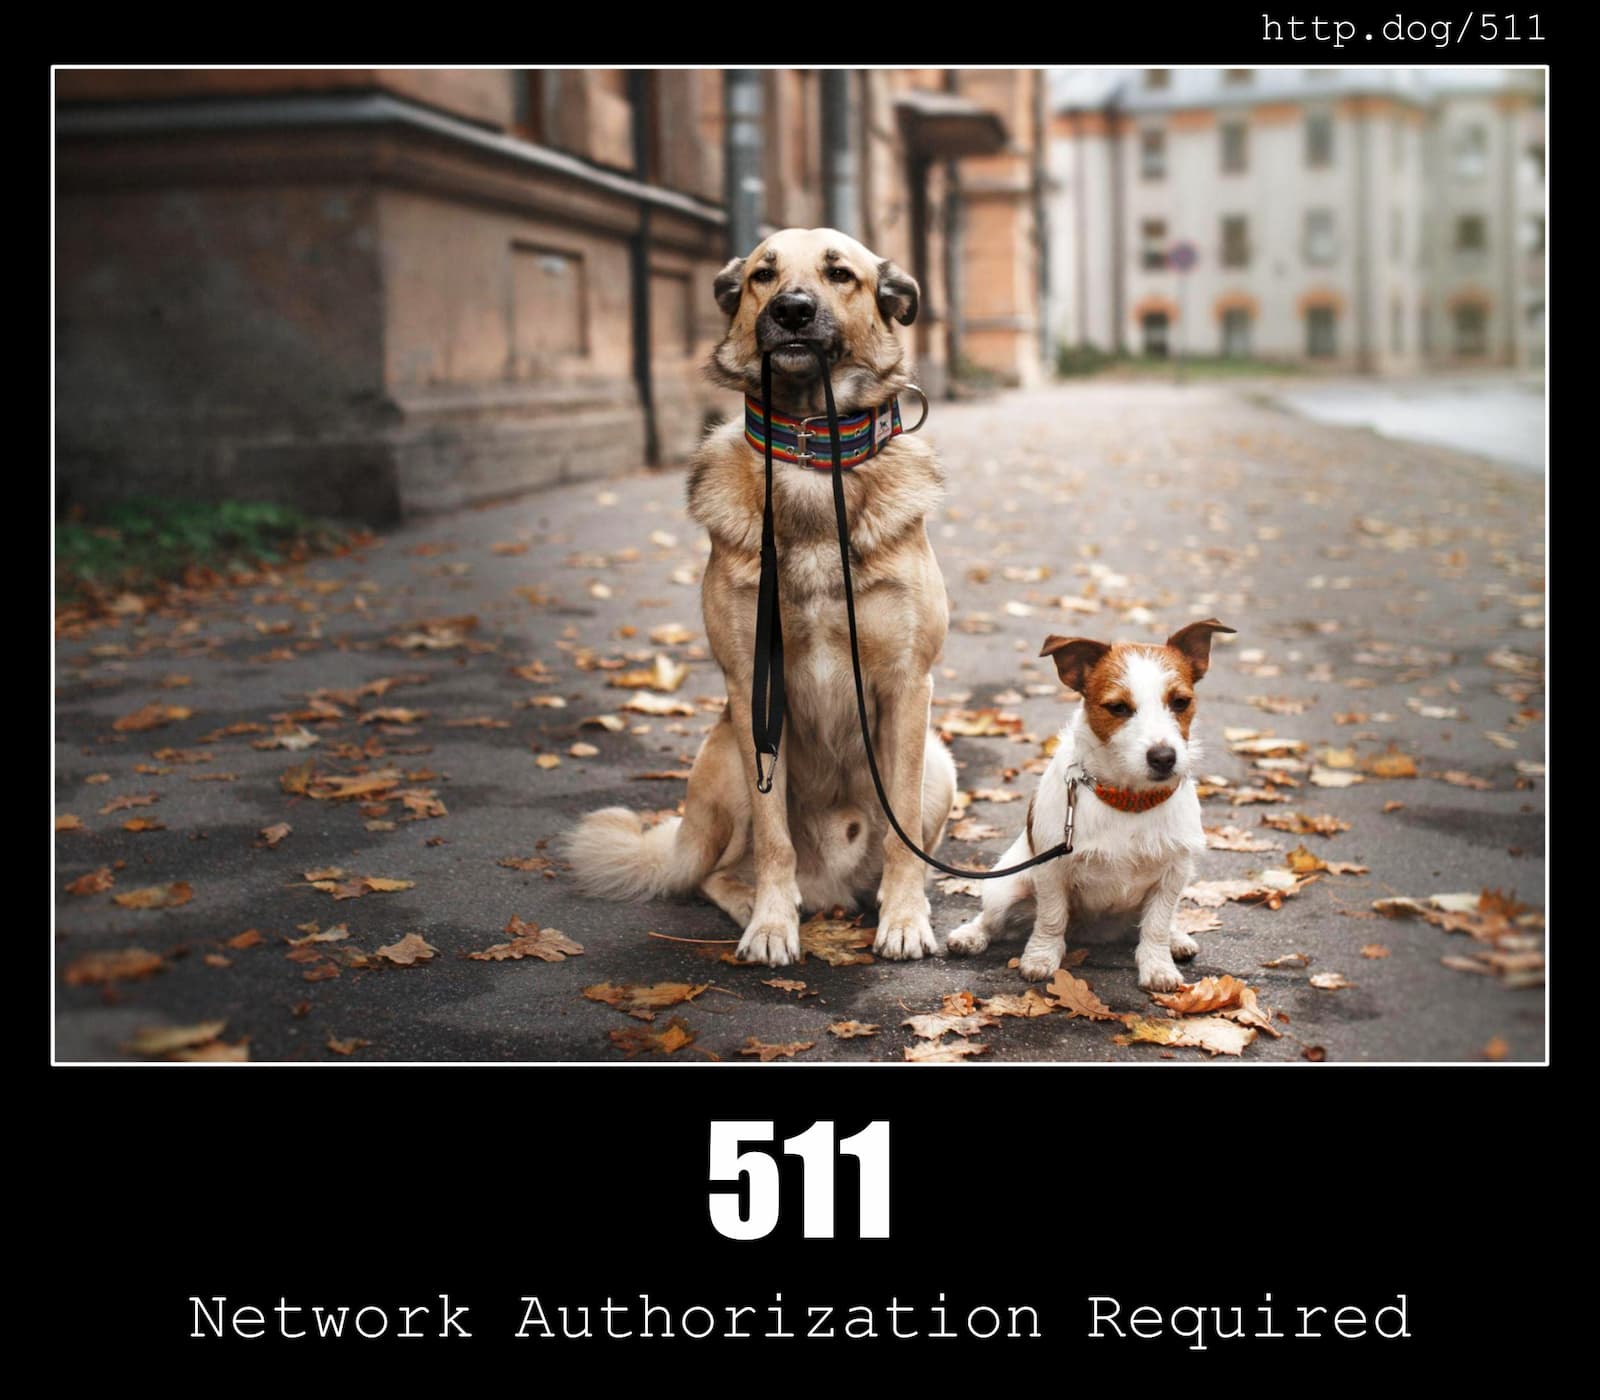 HTTP Status Code 511 Network Authentication Required & Dogs